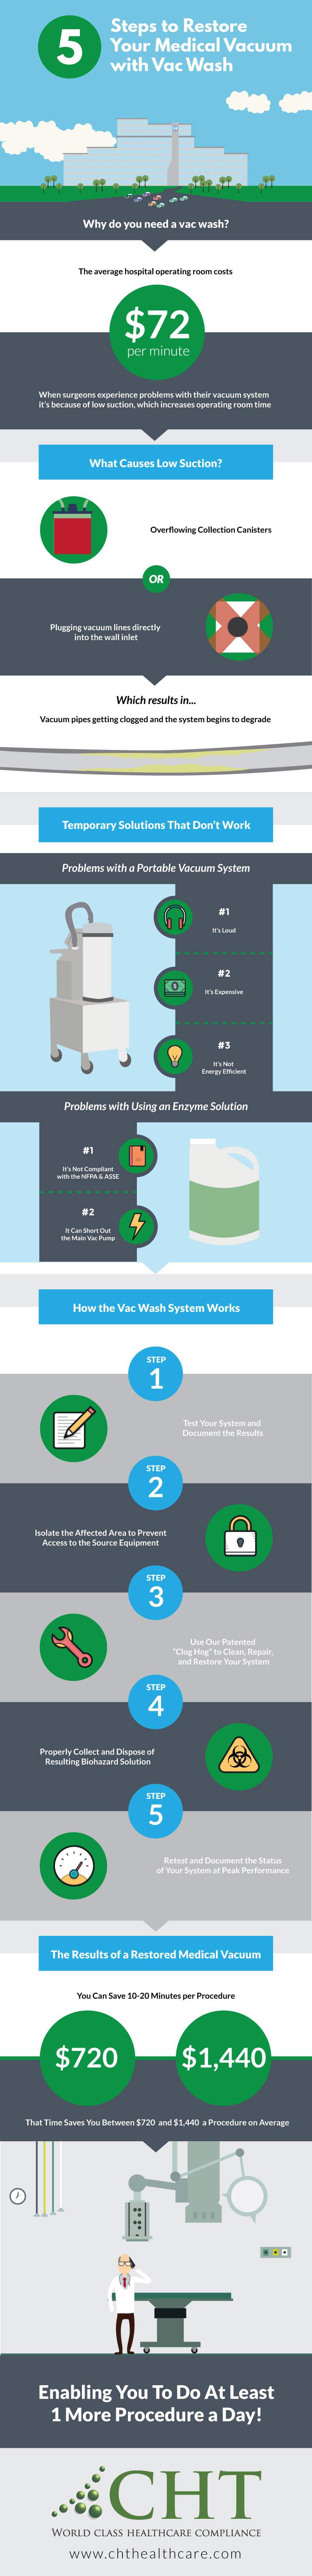 11-vac-wash-infographic-compressed